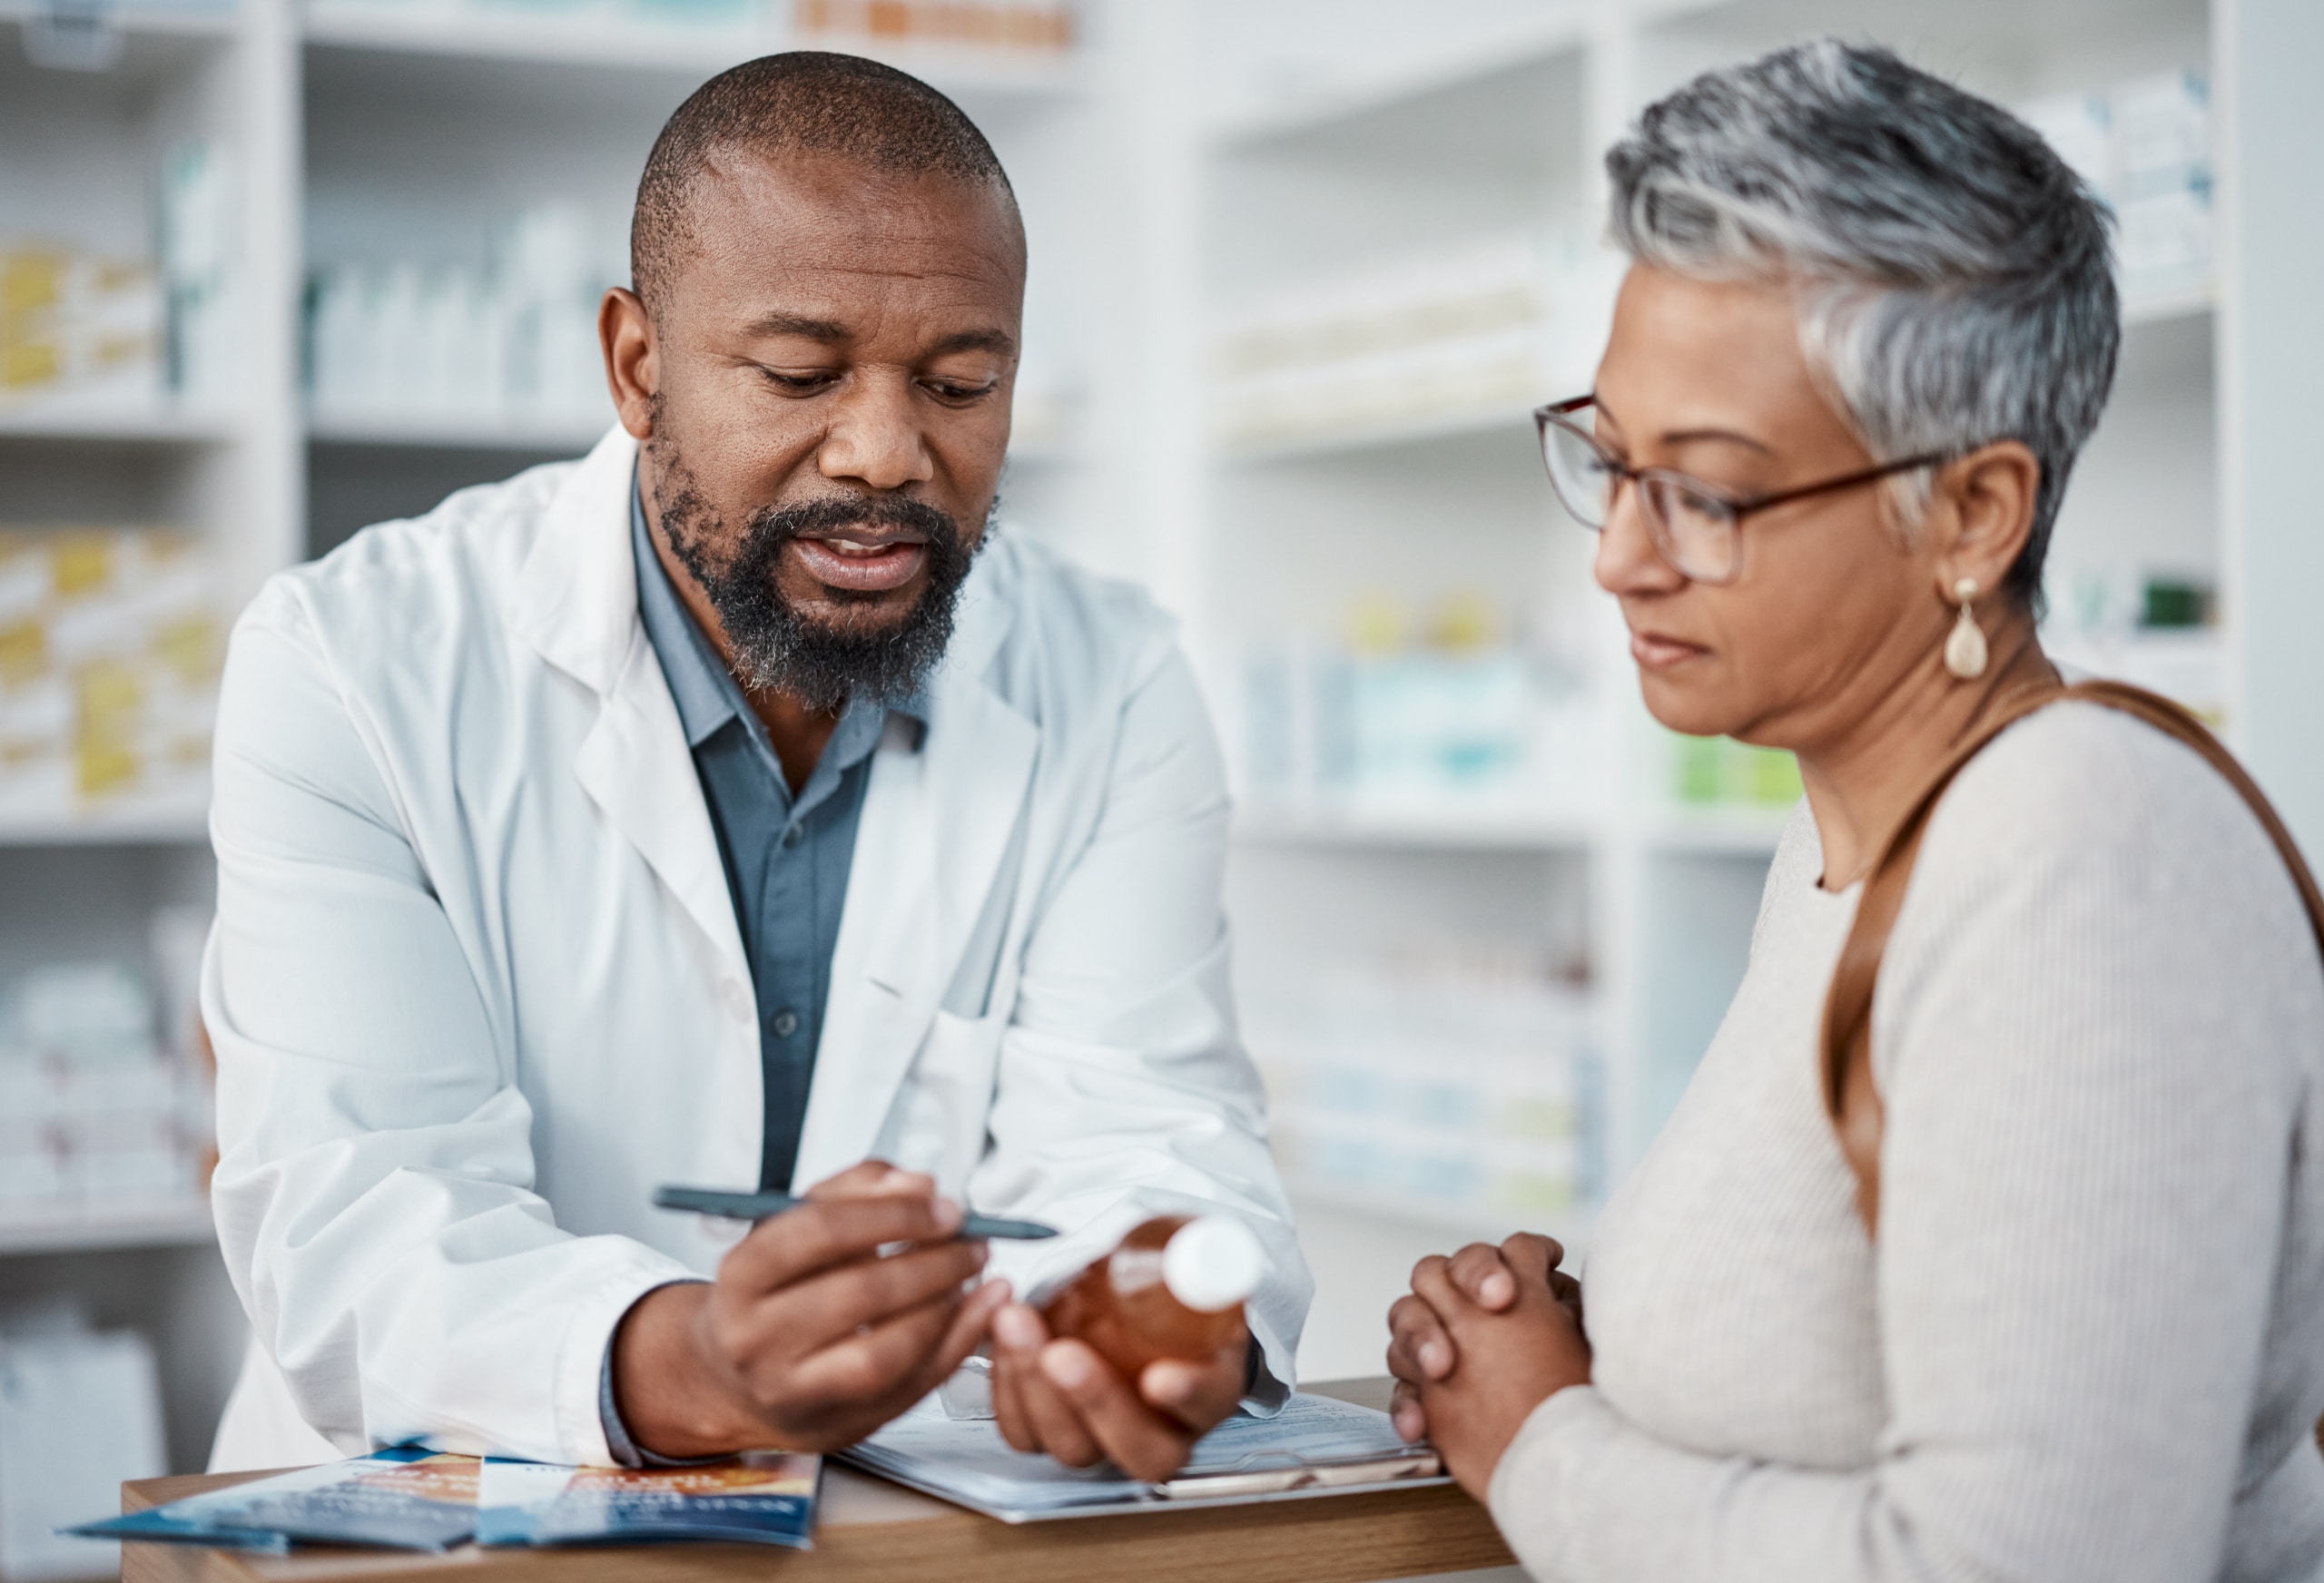 At the pharmacy counter, a black male pharmacist explains medication to a black senior woman.